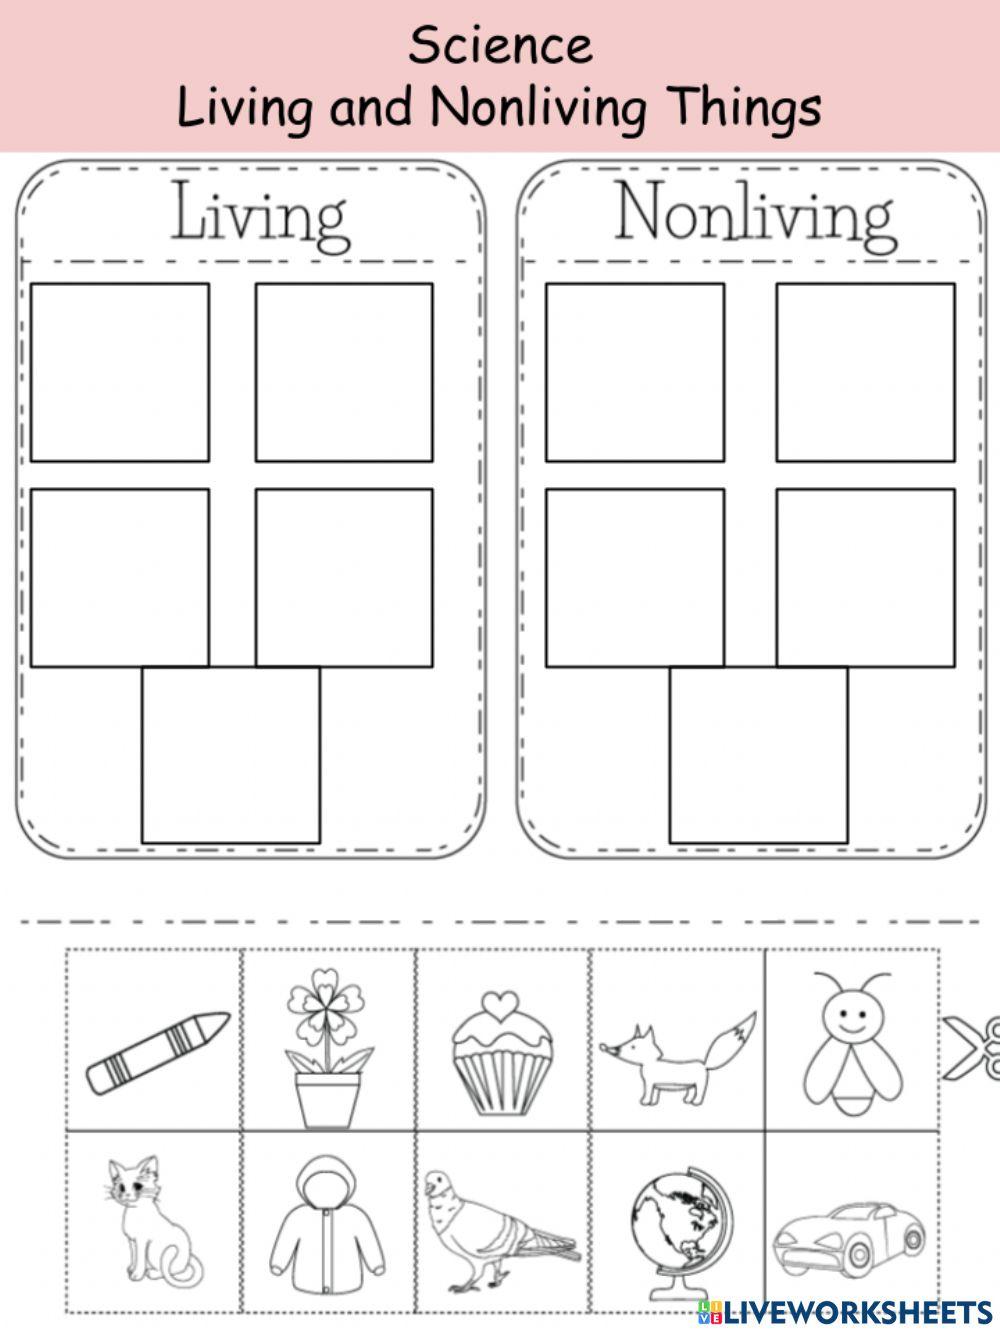 Living Nonliving things